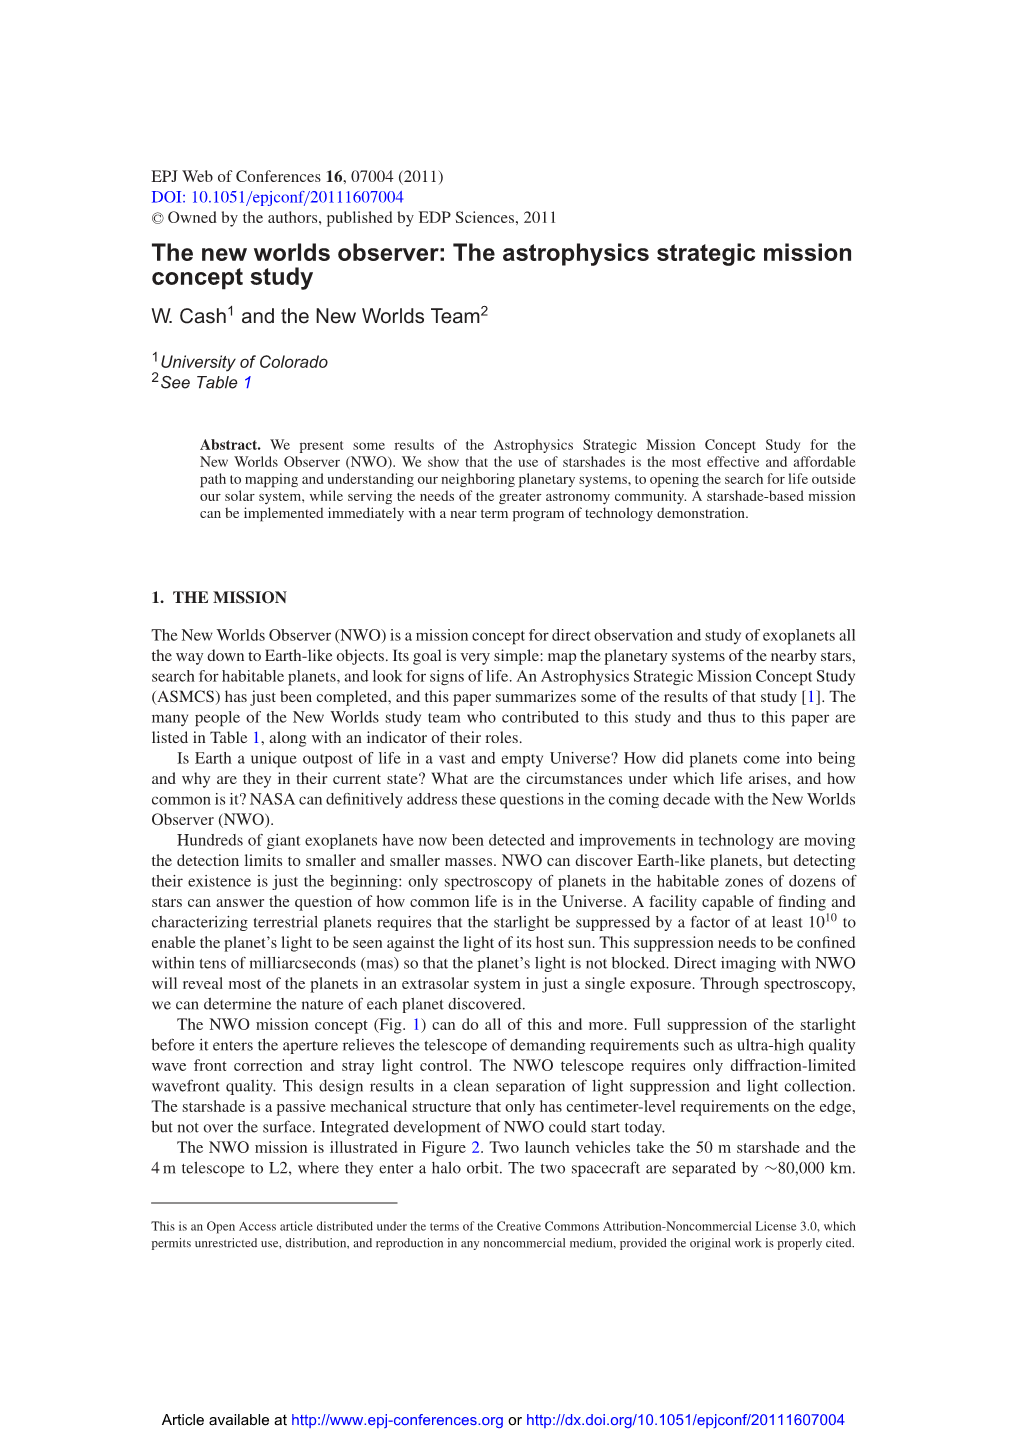 The New Worlds Observer: the Astrophysics Strategic Mission Concept Study W